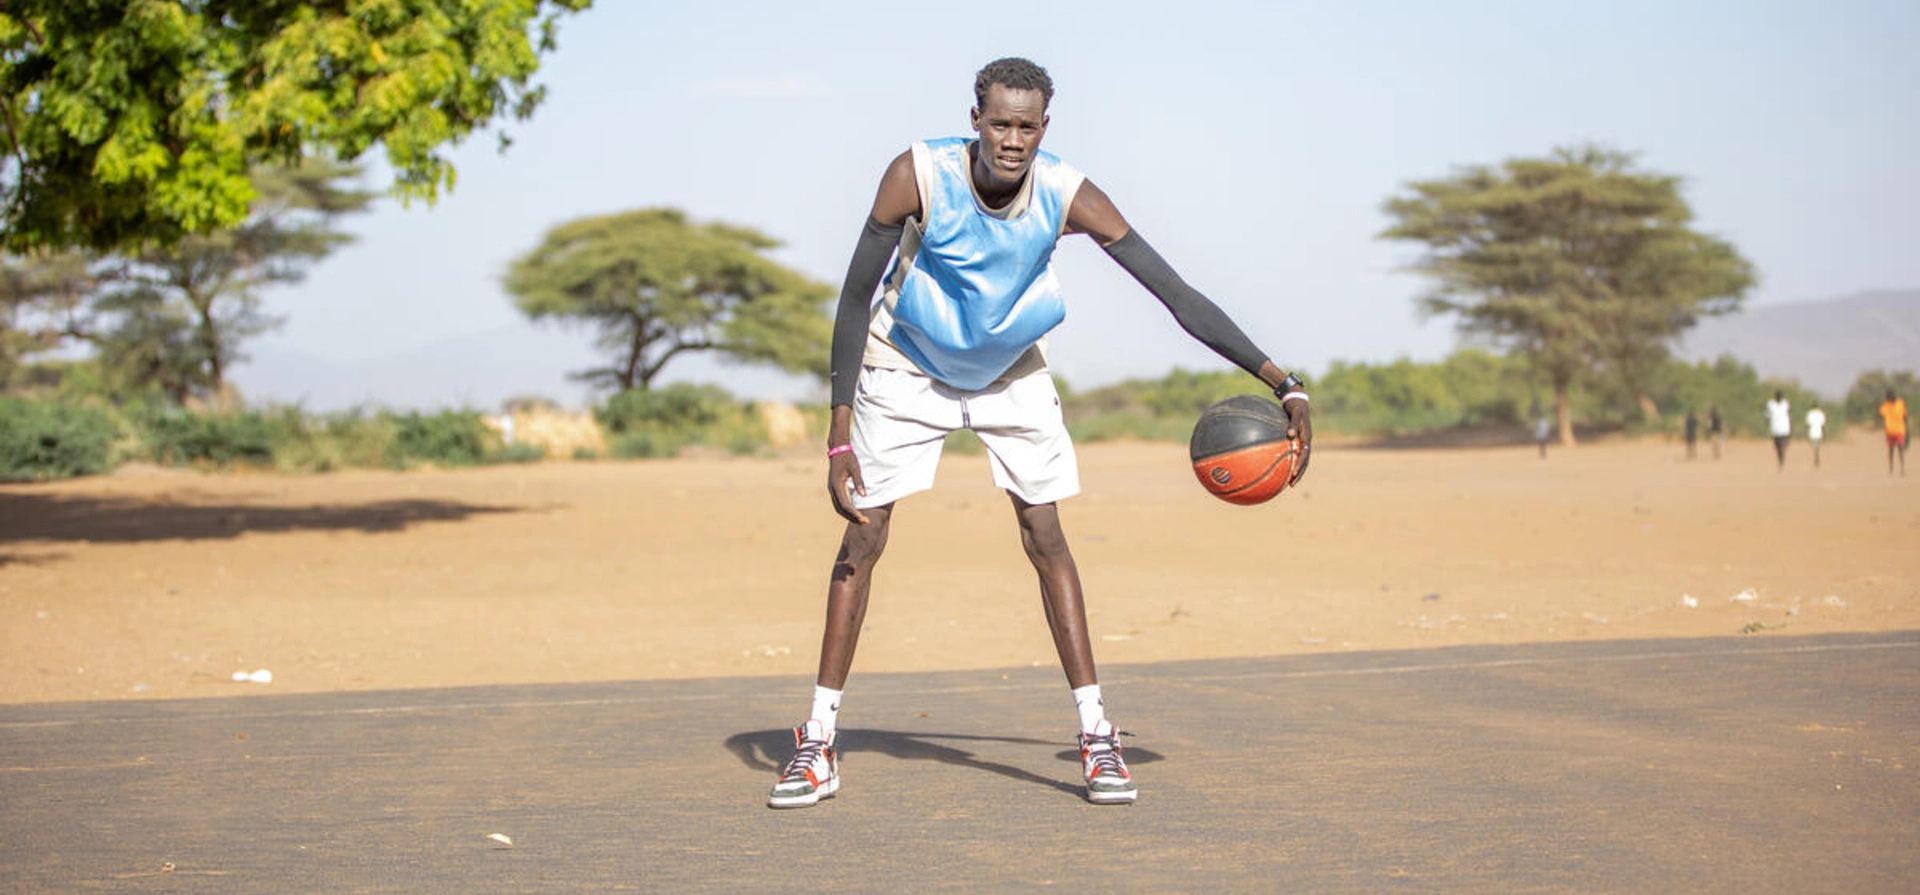 A man wearing sports clothes is playing with a basketball. He is in a sand-filled area.